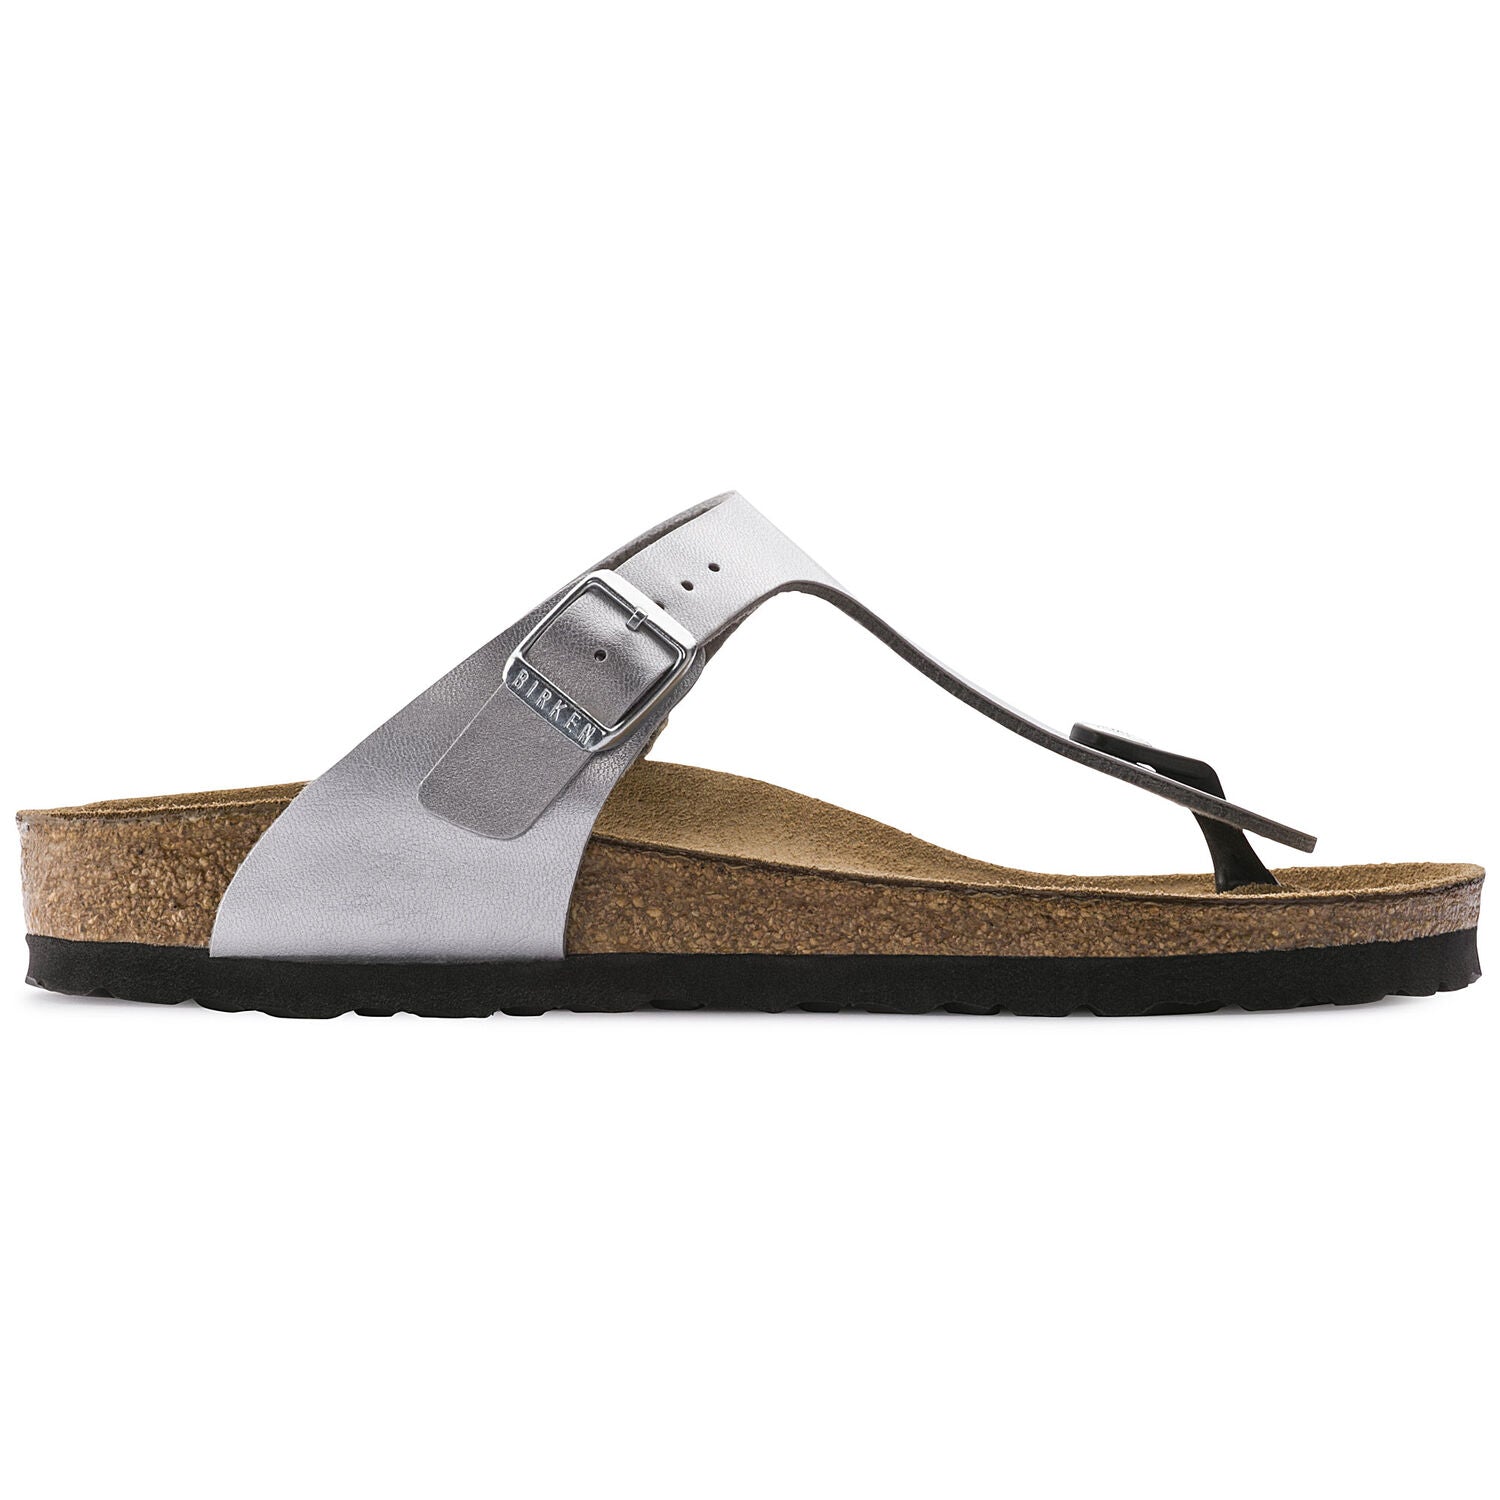 Gizeh - The Birkenstock Classic Thong in Matte Silver